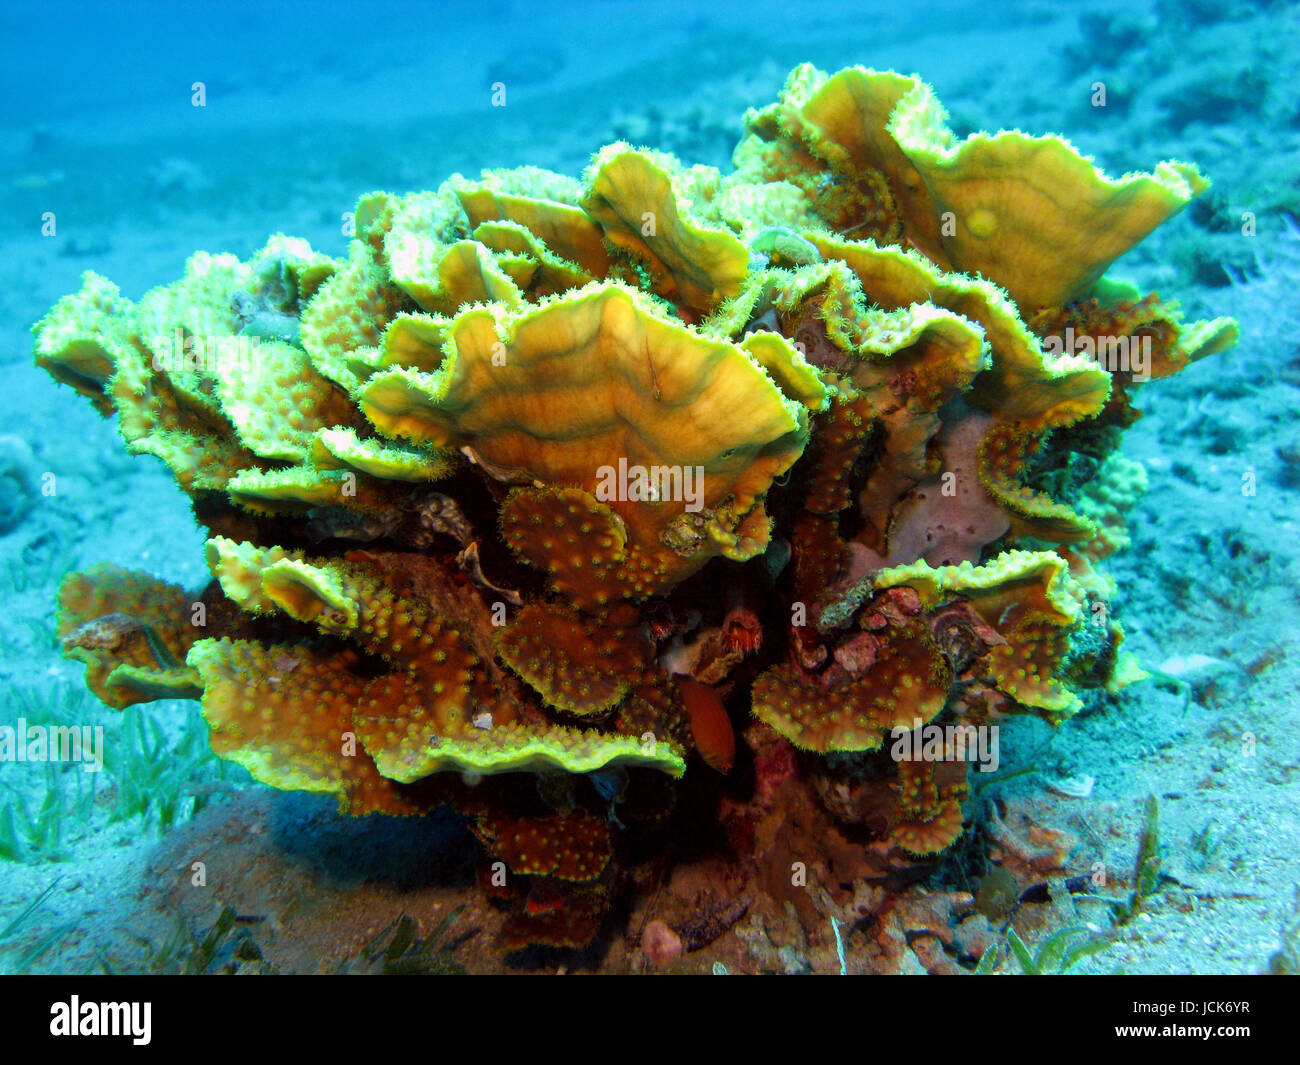 coral reef with great yellow  coral Turbinaria reniformisat the bottom of tropical sea Stock Photo